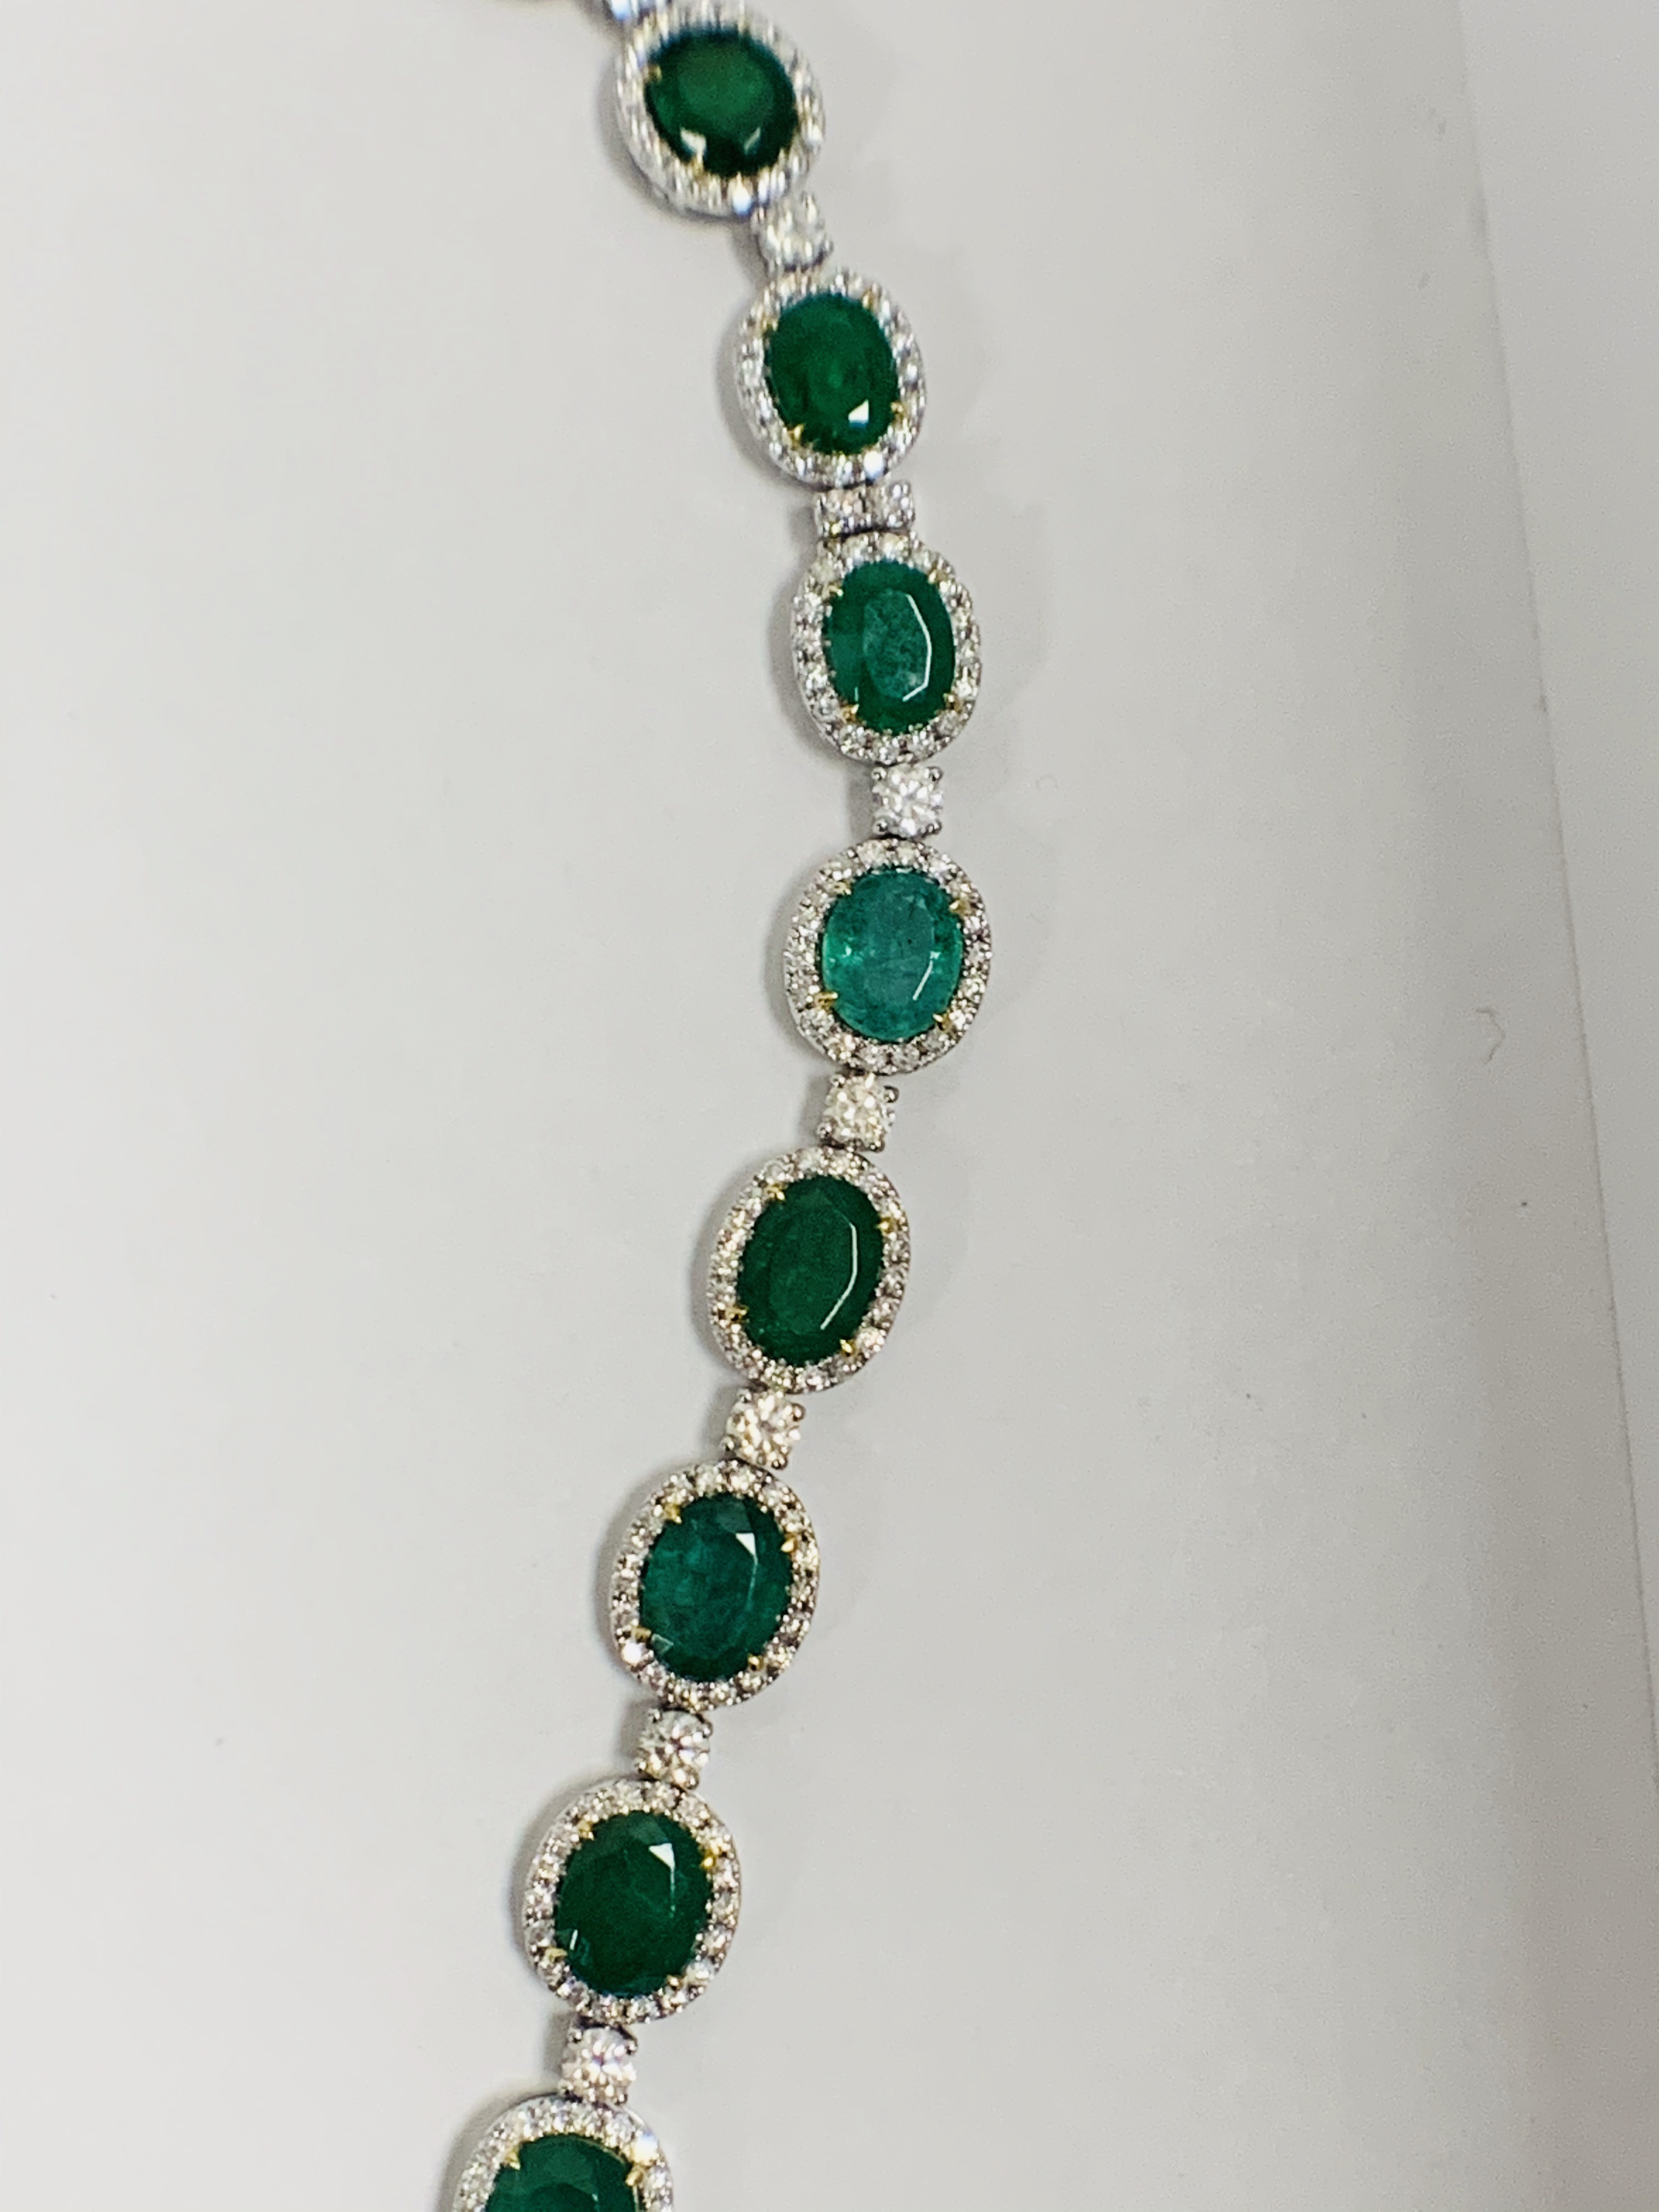 Platinum and Yellow Gold Emerald and Diamond necklace featuring, 29 oval cut, light to deep green Em - Image 6 of 36